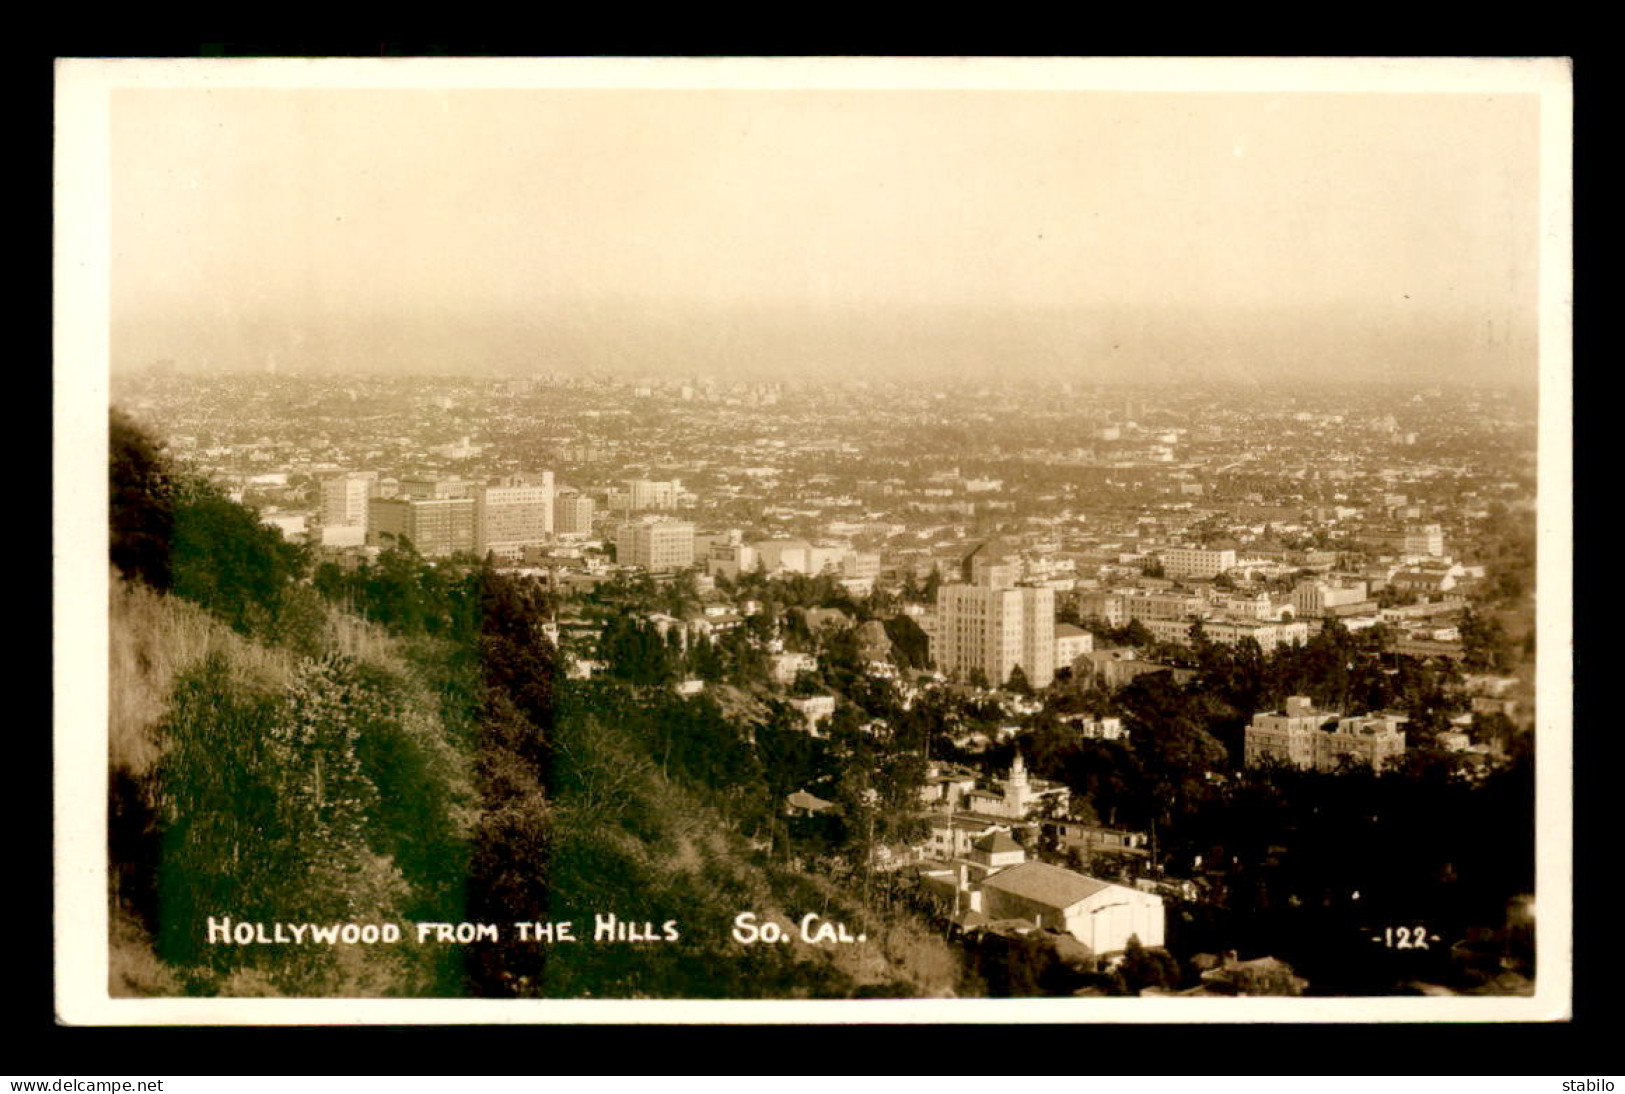 ETATS-UNIS - LOS ANGELES - HOLLYWOOD FROM THE HILLS - Los Angeles